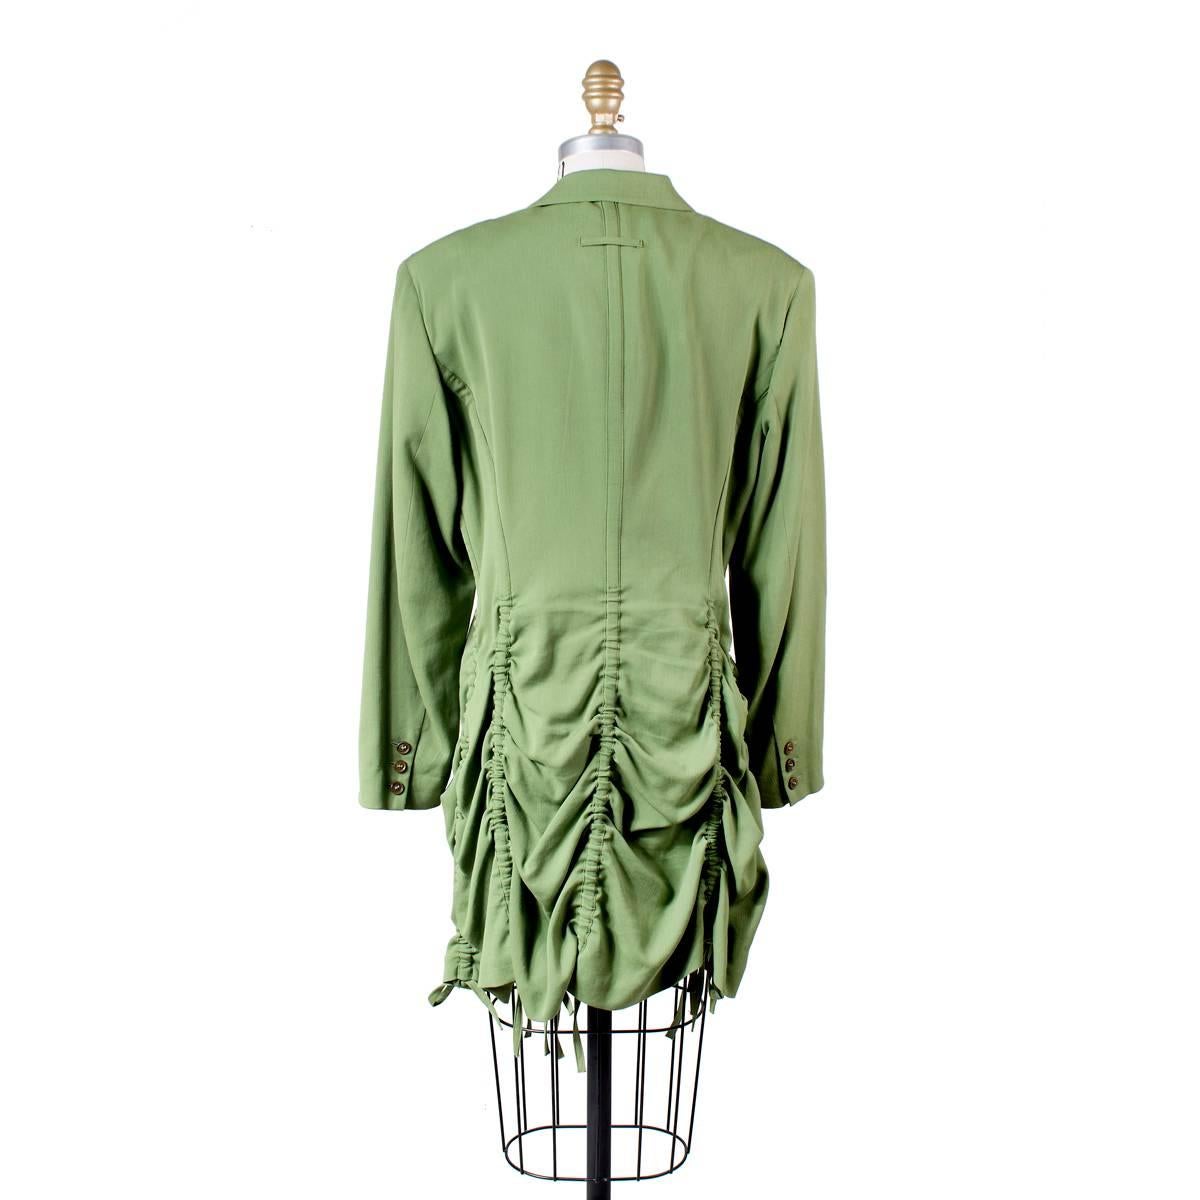 Coat by Jean Paul Gaultier circa 2000s.  Features vertical drawstrings that can be cinched to create a scalloped tiered hem.  Cotton/rayon/wool blend.

Size 42
16.5